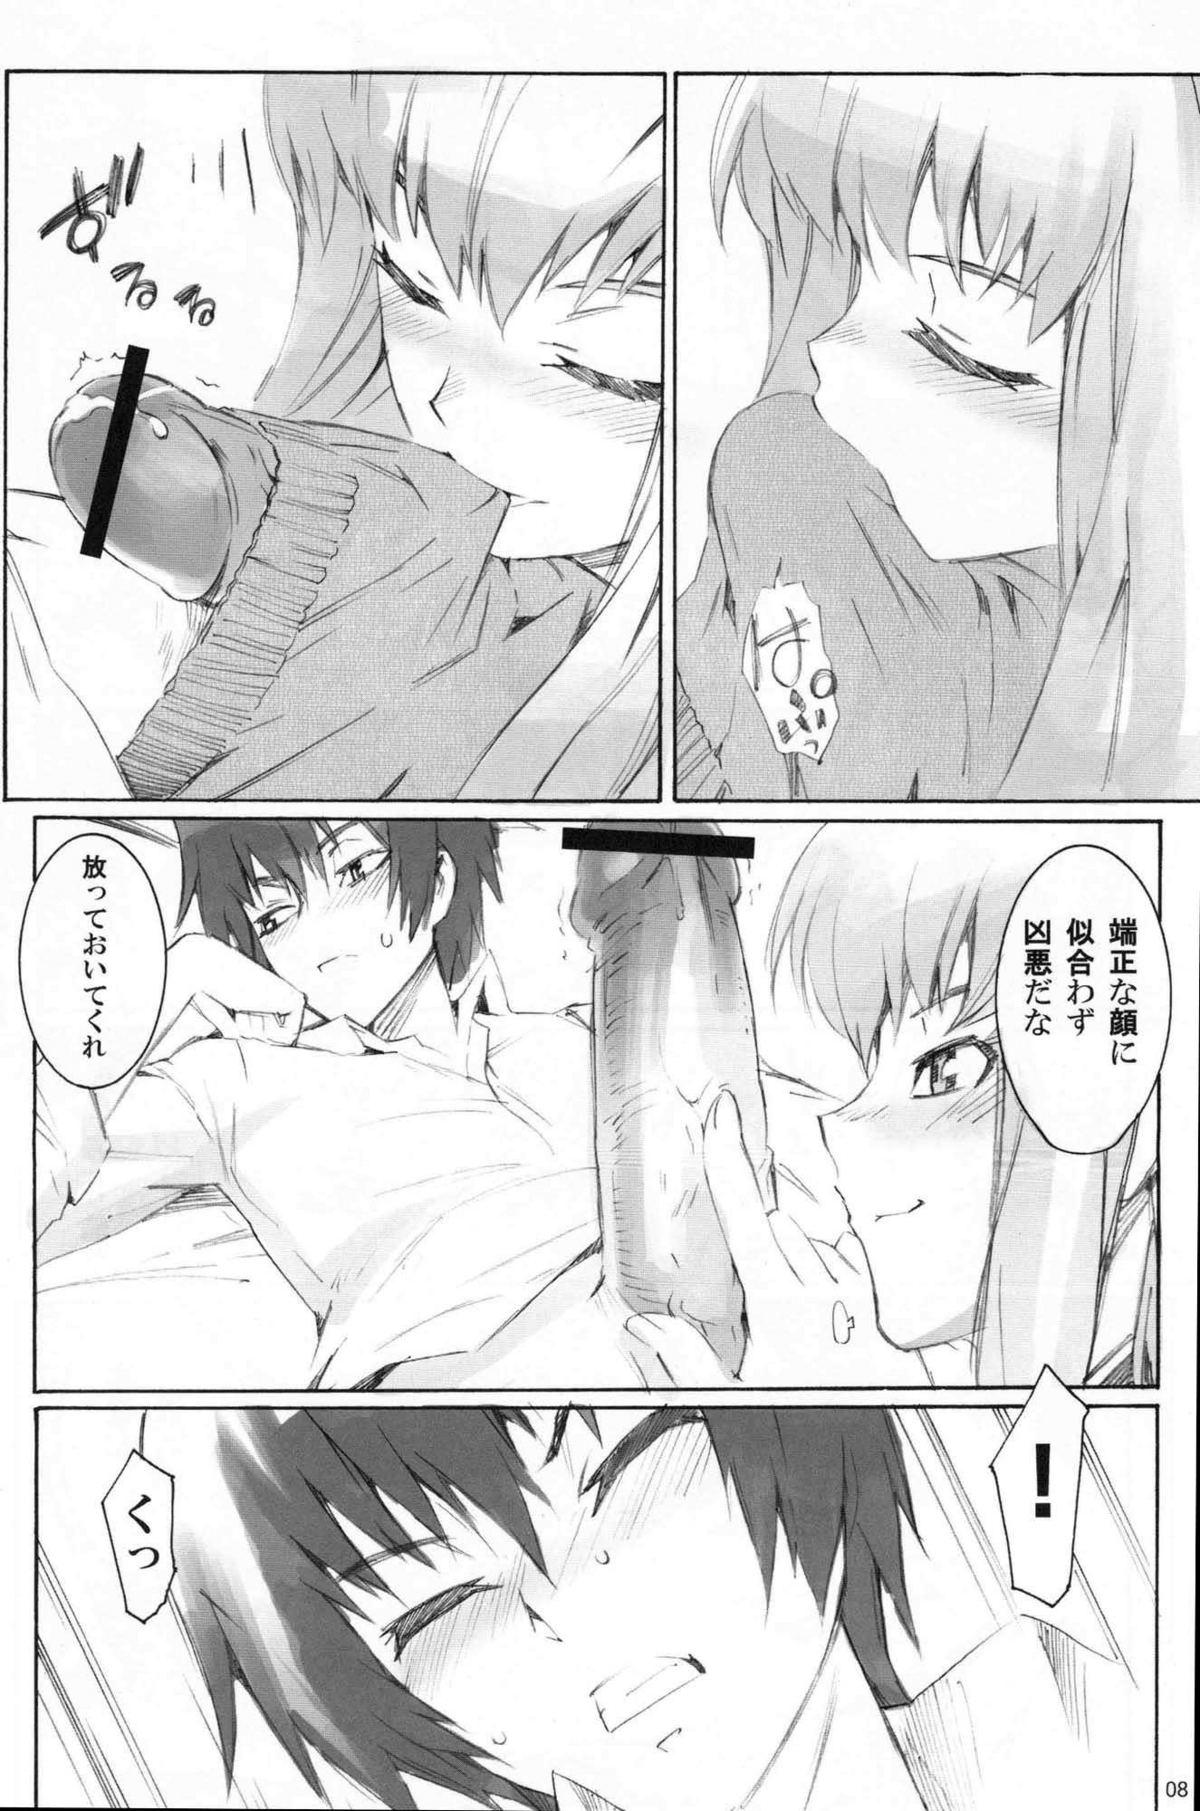 Mum SOULFLY 4 - Code geass Tongue - Page 7